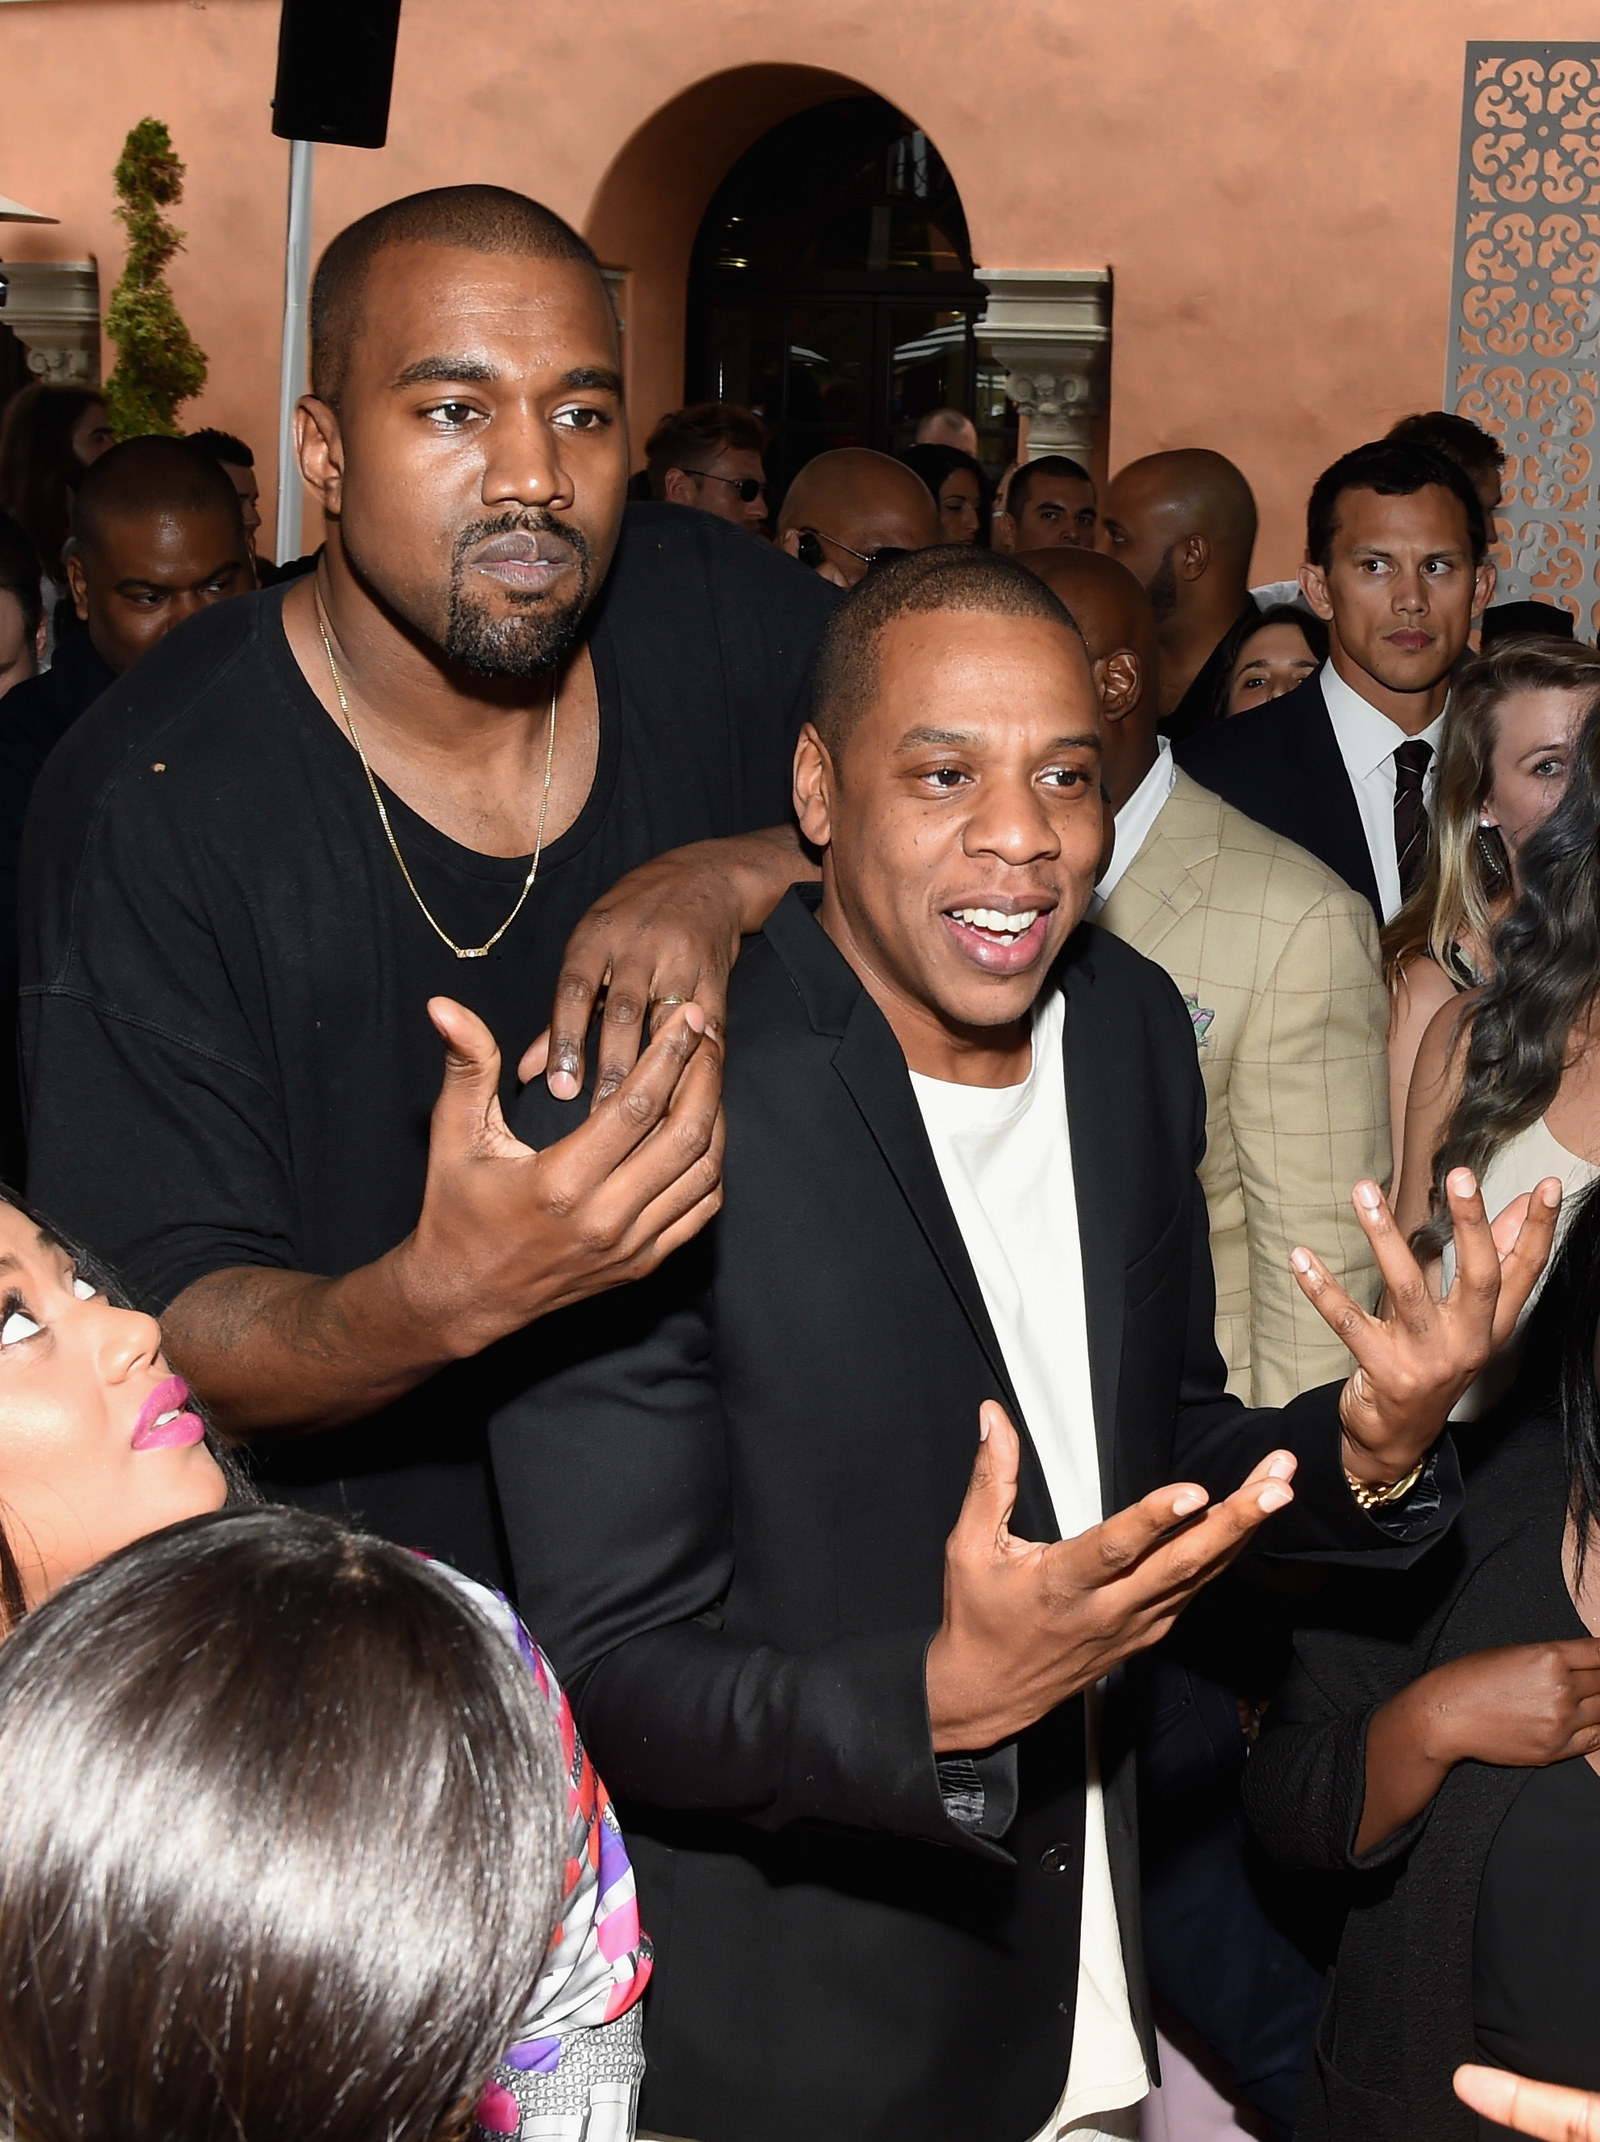 Rundown of Jay Z and Kanye's friendship – the highs and lows